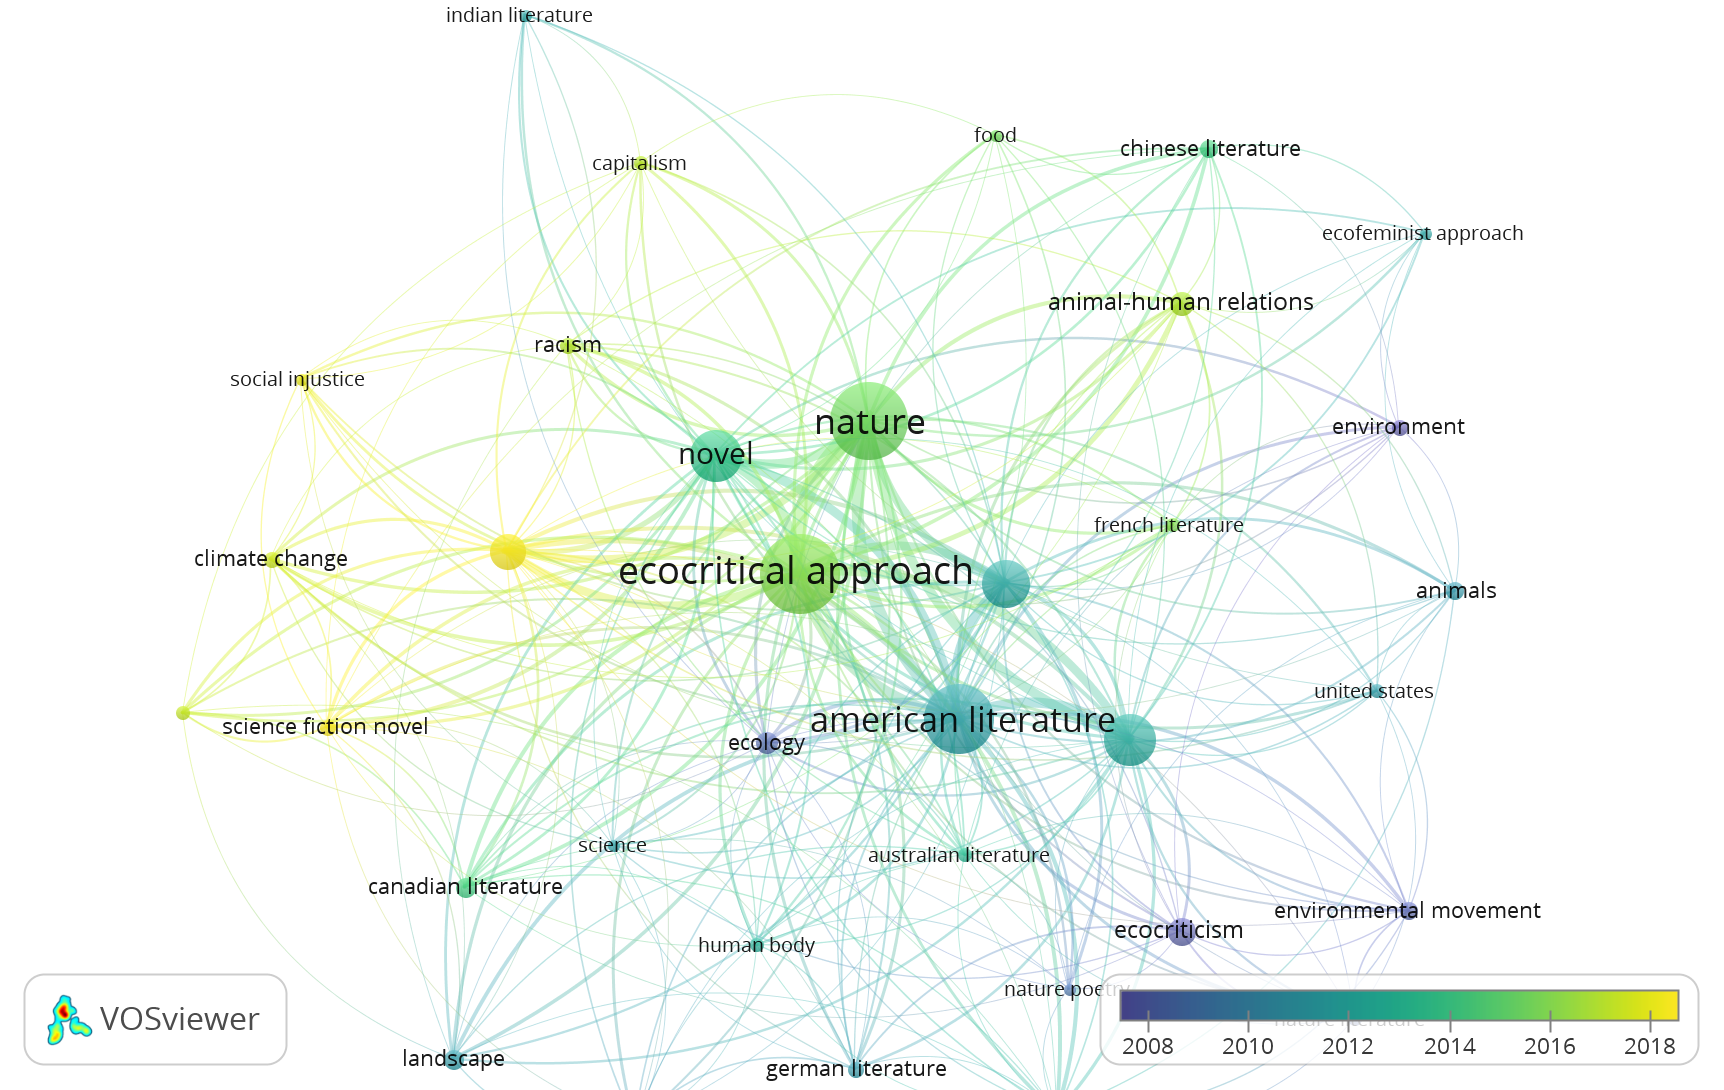 Screenshot of a network diagram with large nodes around ecocritical, nature, american literature